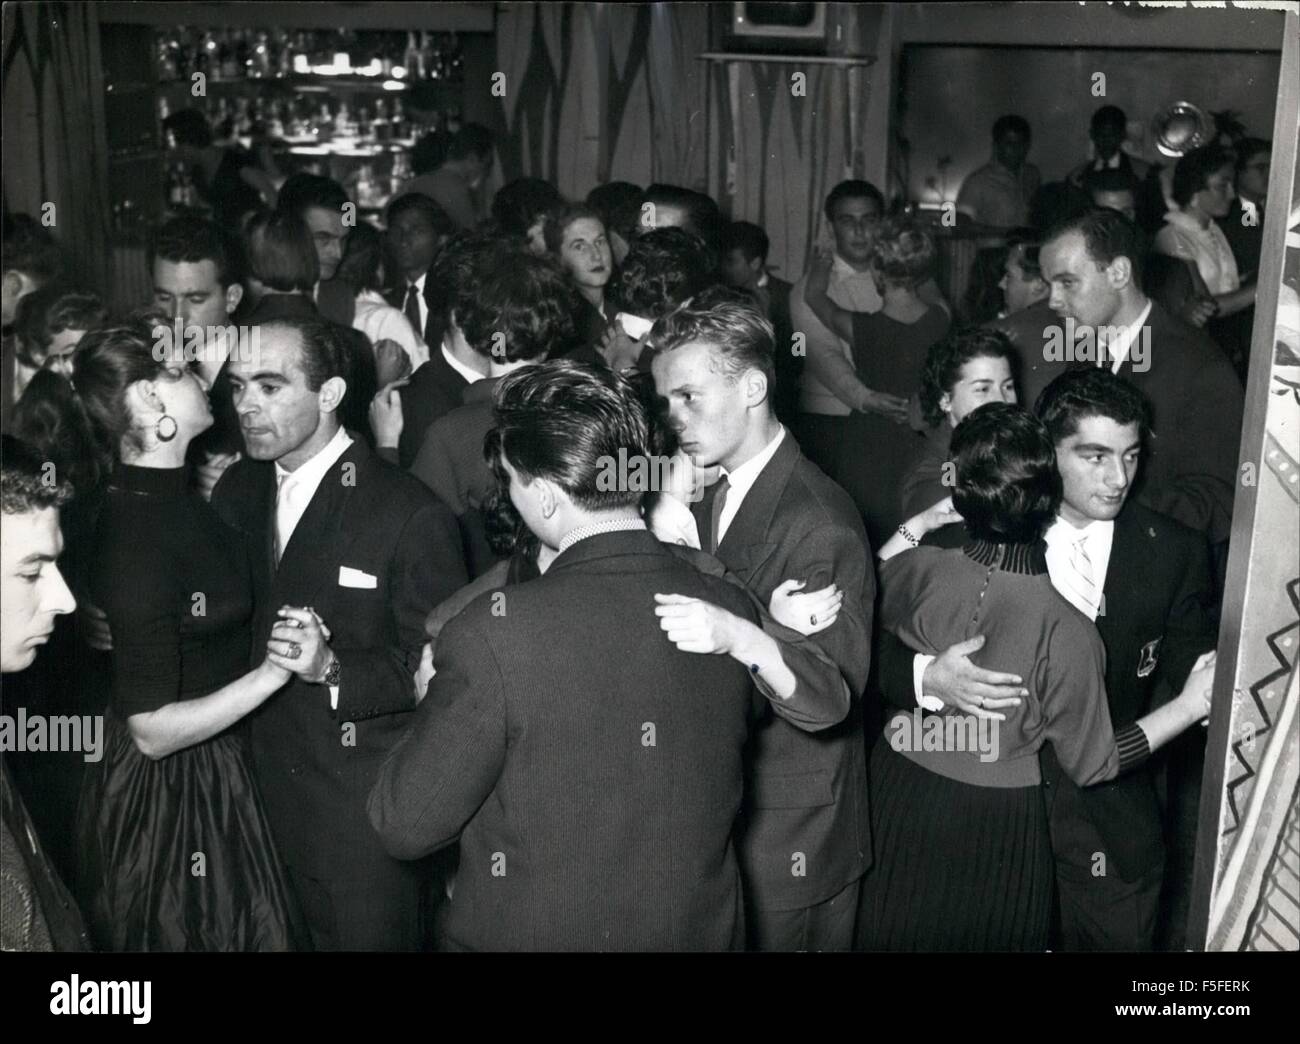 1967 - Mambo Mesmerism In The Club Tahiti In the night club under a chapel, young couple enjoy themselves like this - performing the strong rhythmic dance of South American and Spanish origin. © Keystone Pictures USA/ZUMAPRESS.com/Alamy Live News Stock Photo